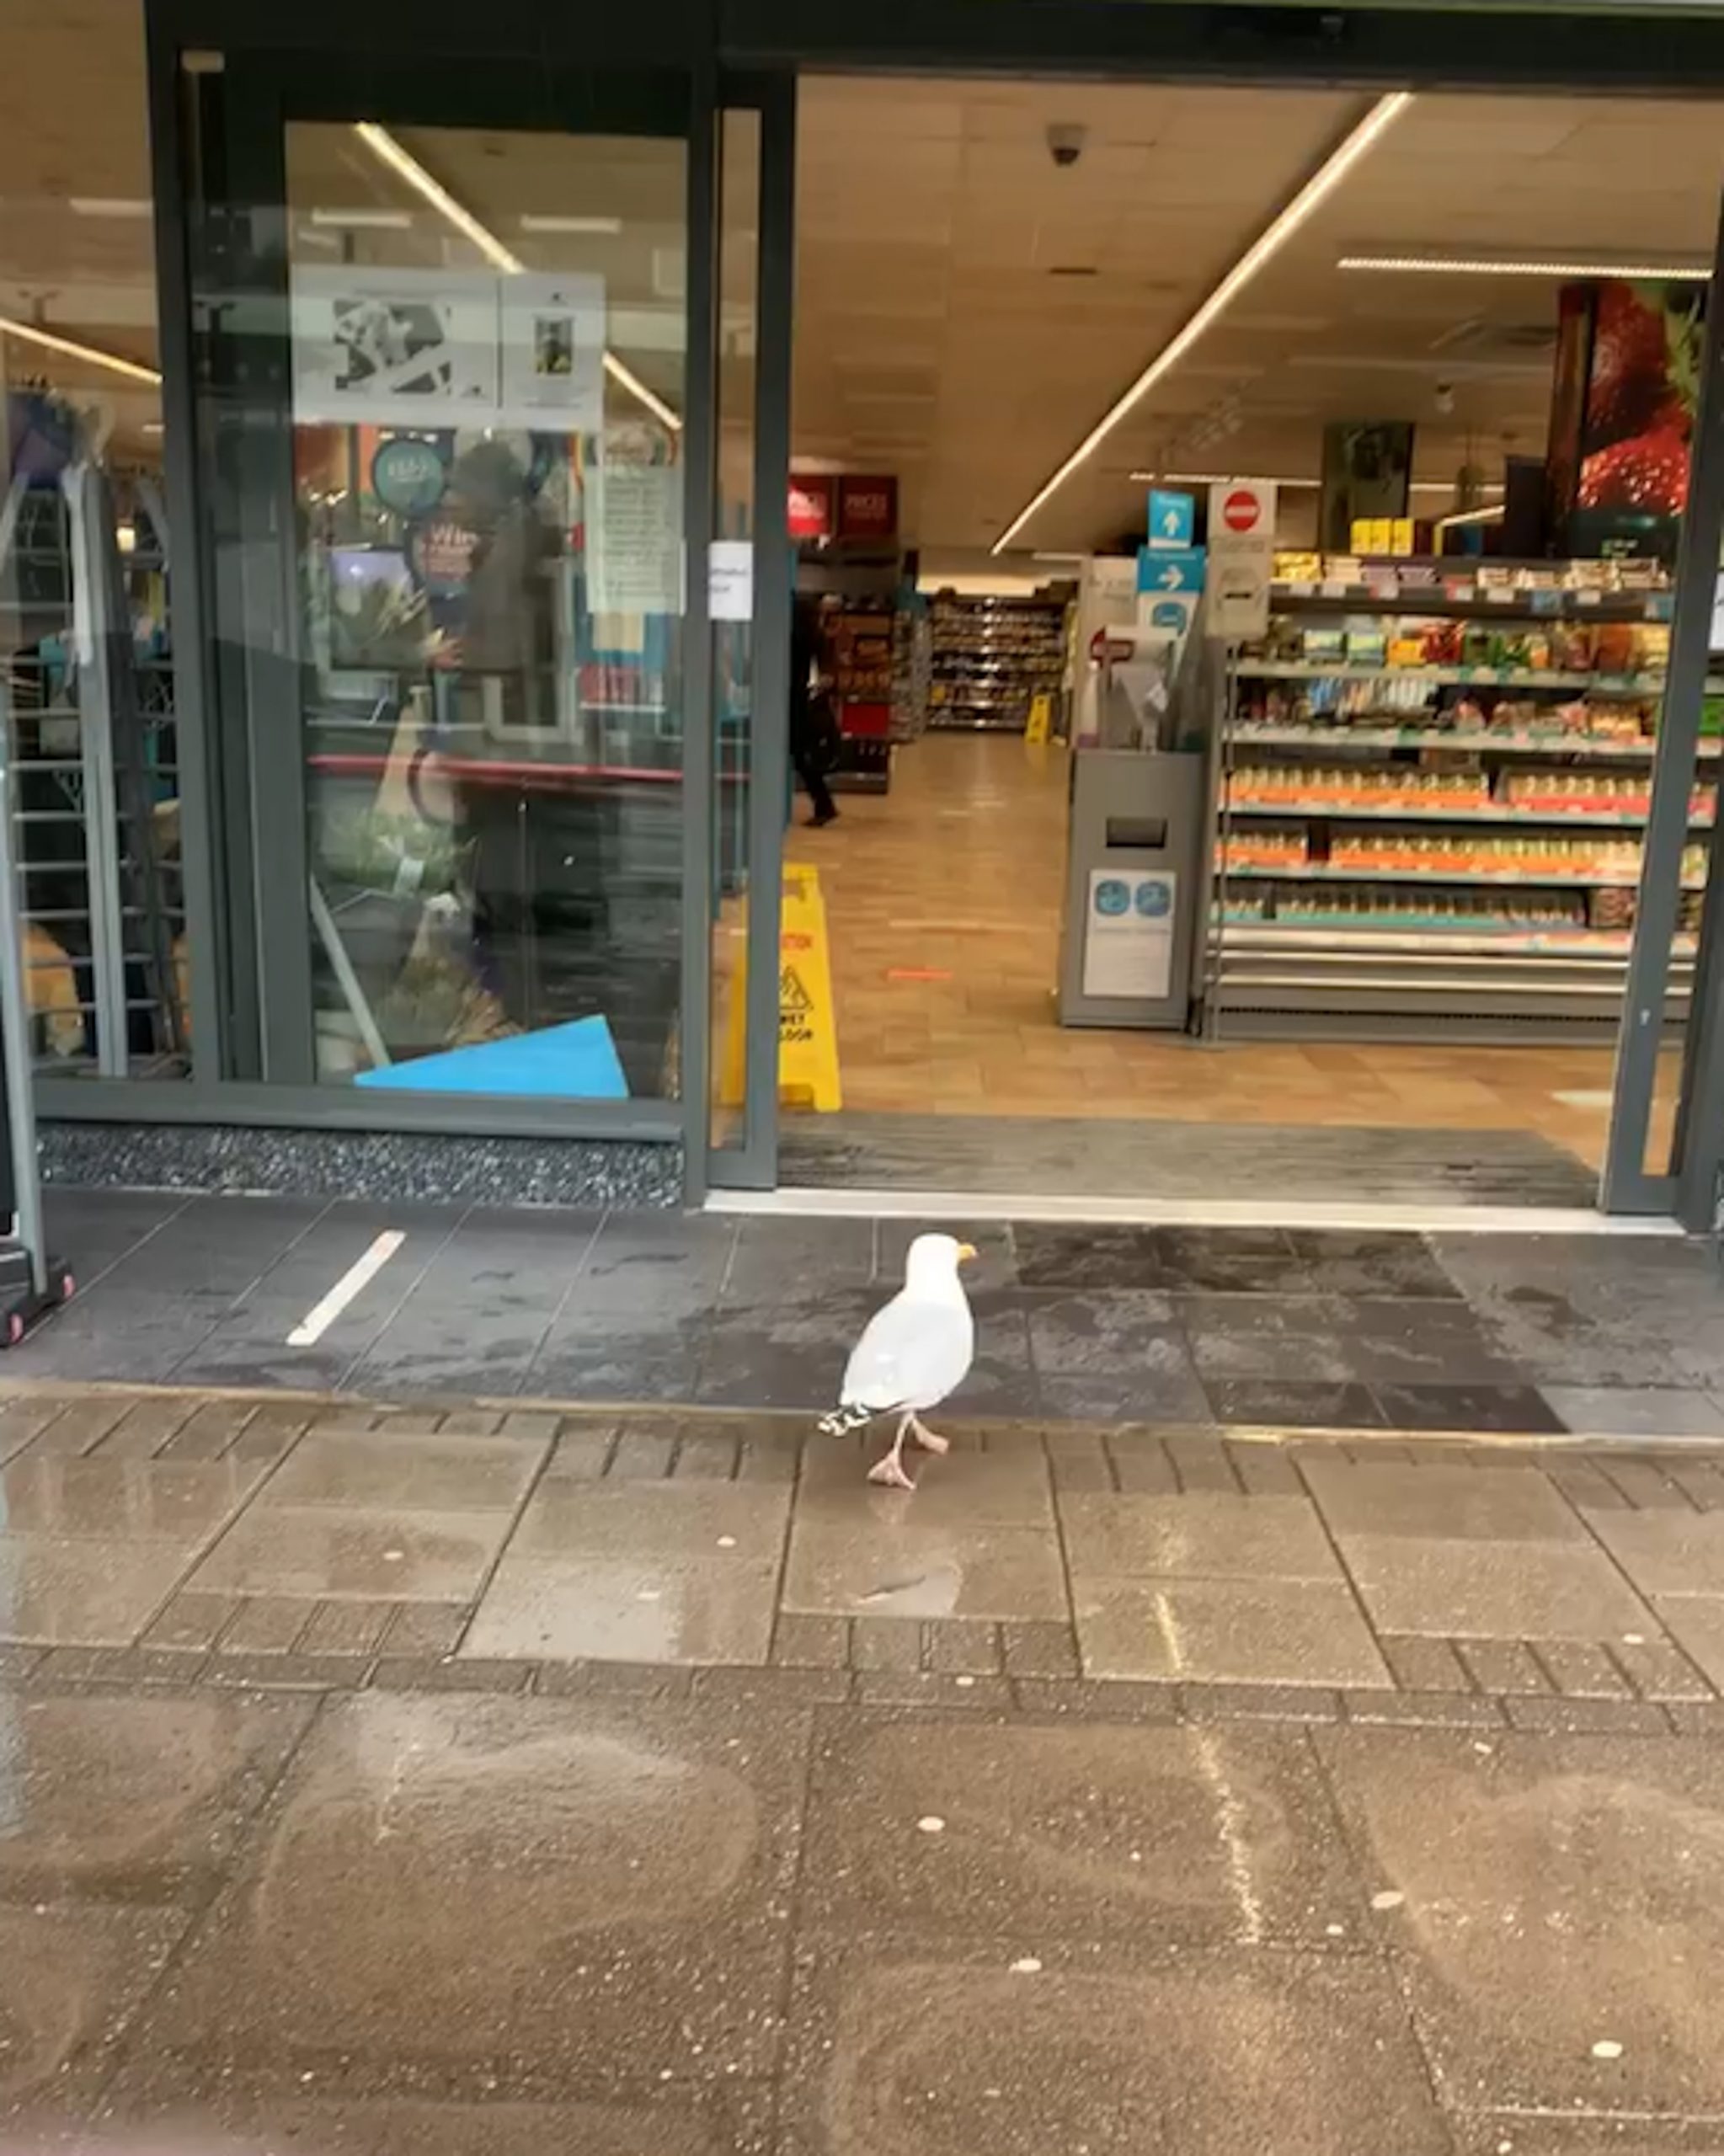 Gus entering the shop to seek out his lunch| Viral Video News